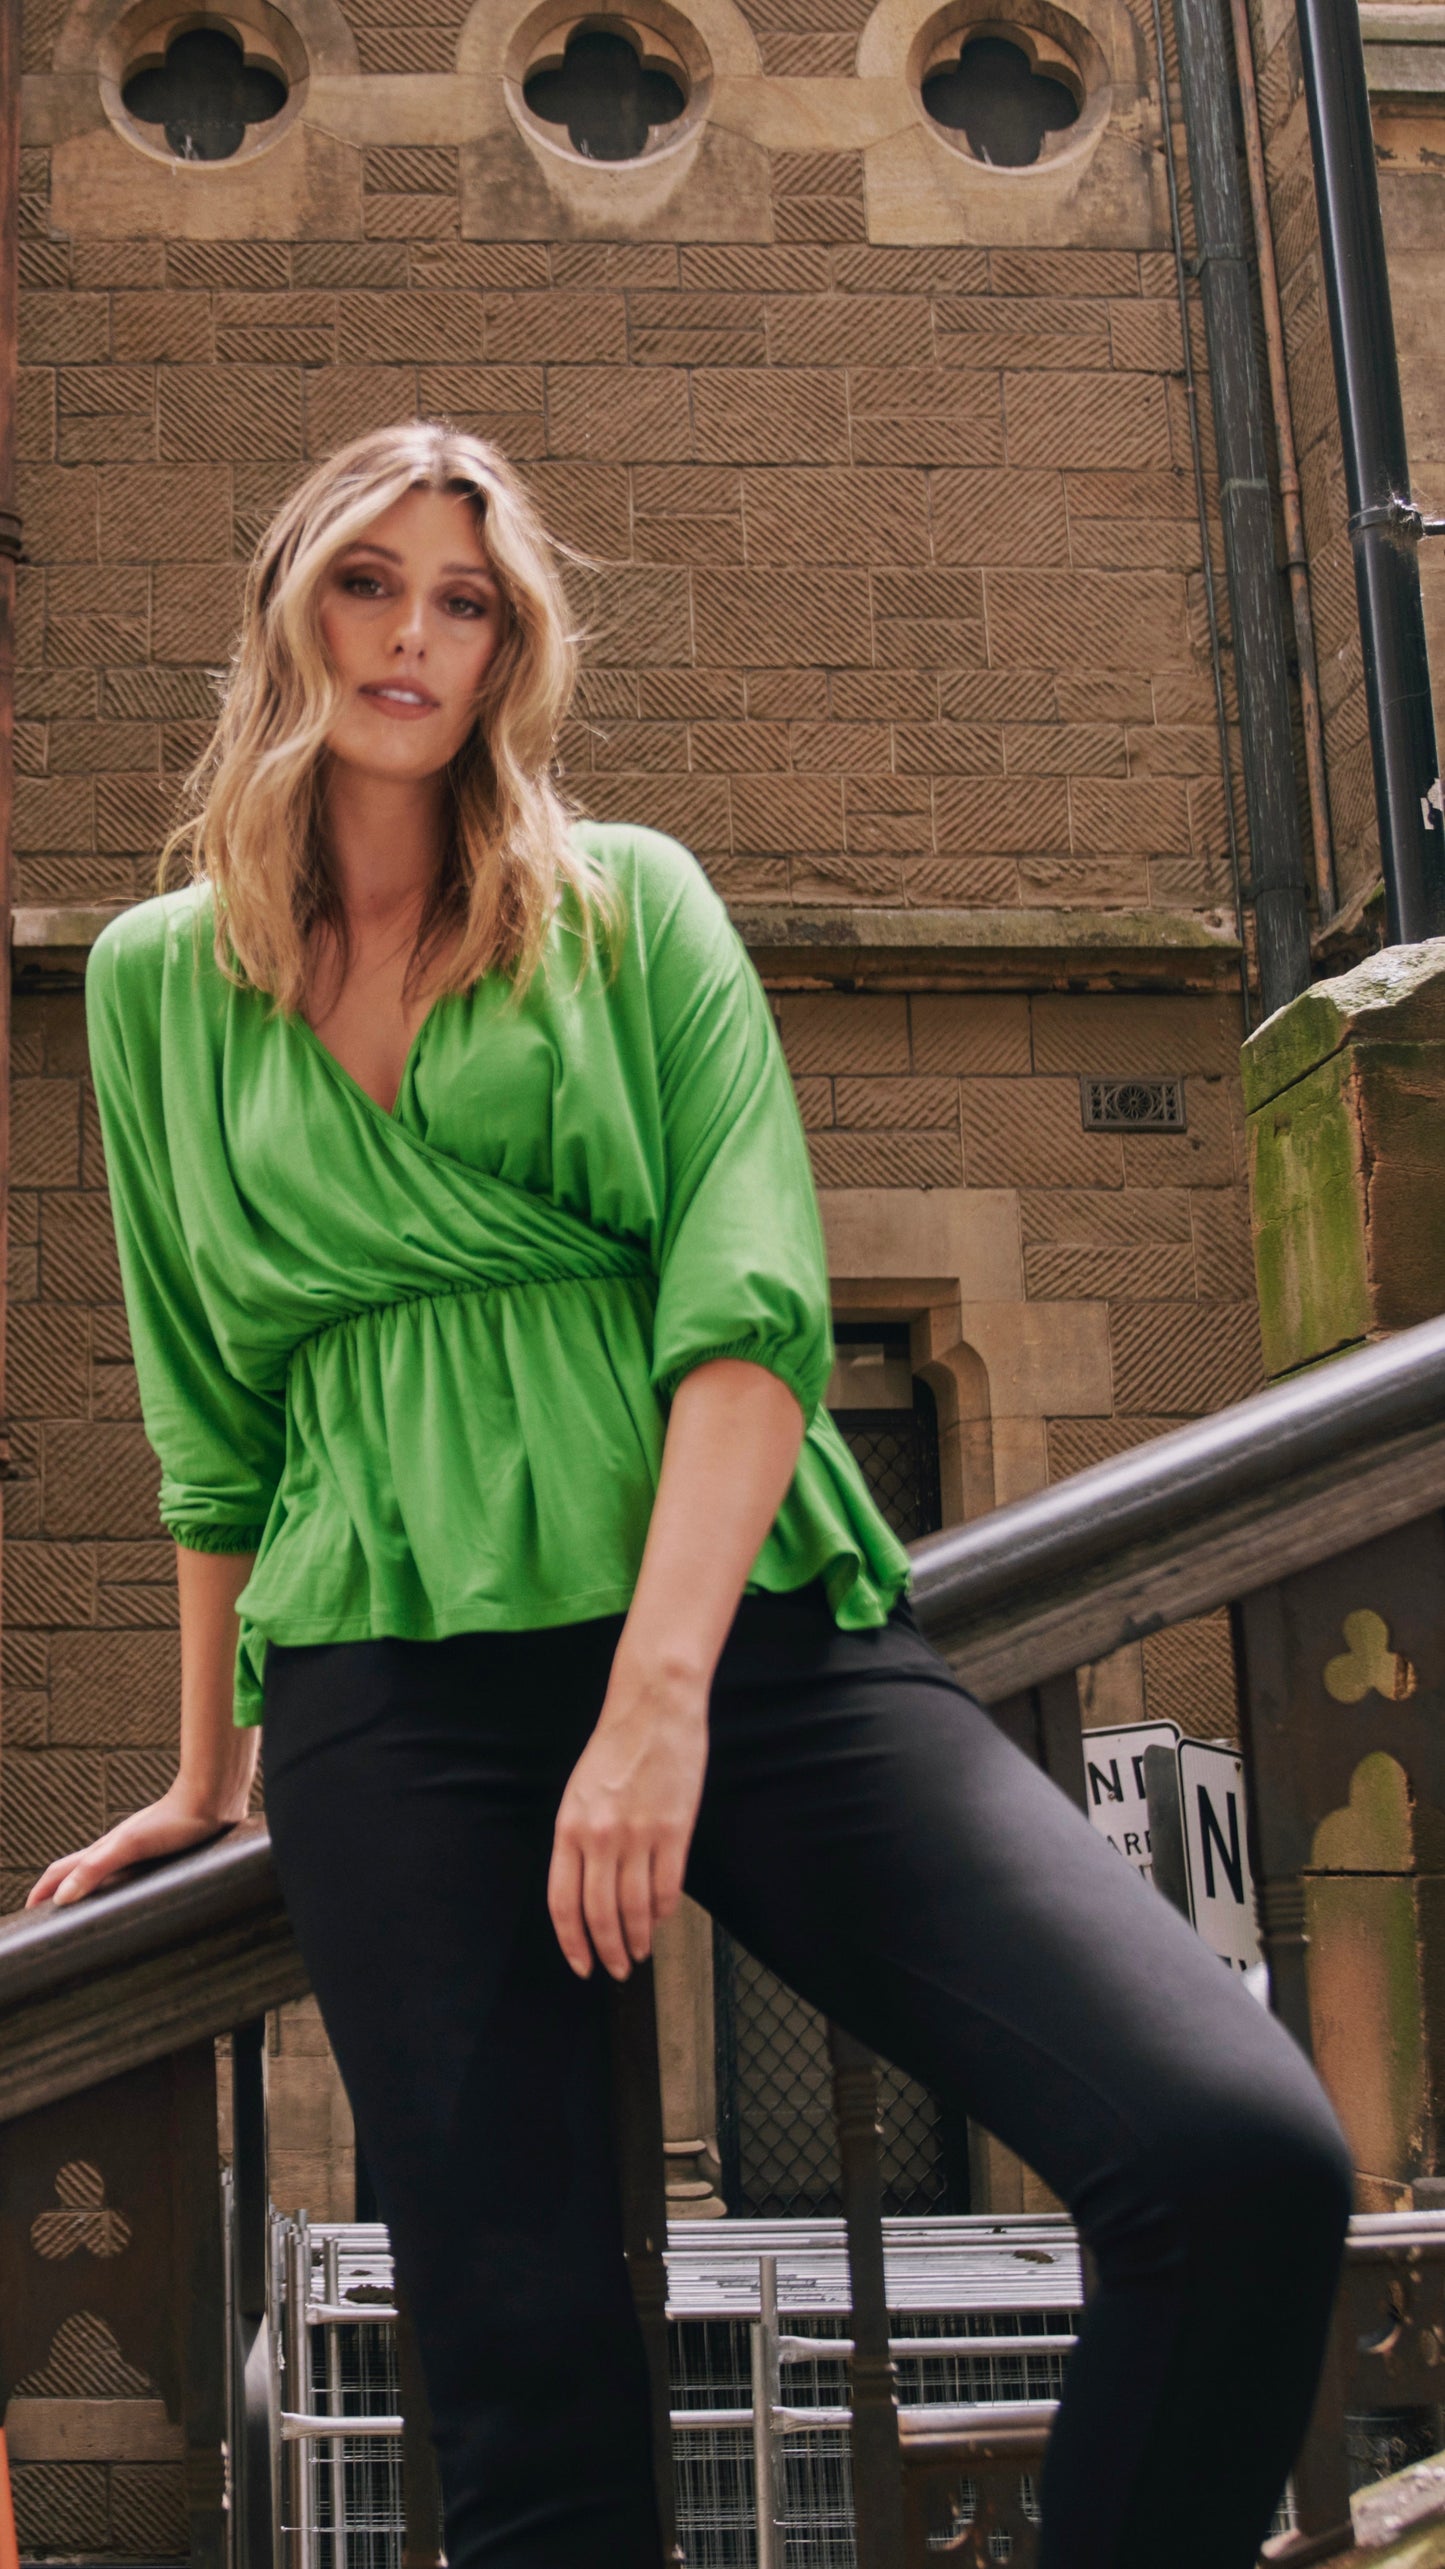 Bayeaux Wrap Top - Green | Betty Basics | The Bayeaux Top combines a classic shape with a comfortable fit, making this the go to when pairing with your fave bottoms
Features:

Faux wrap (breastfeeding friend